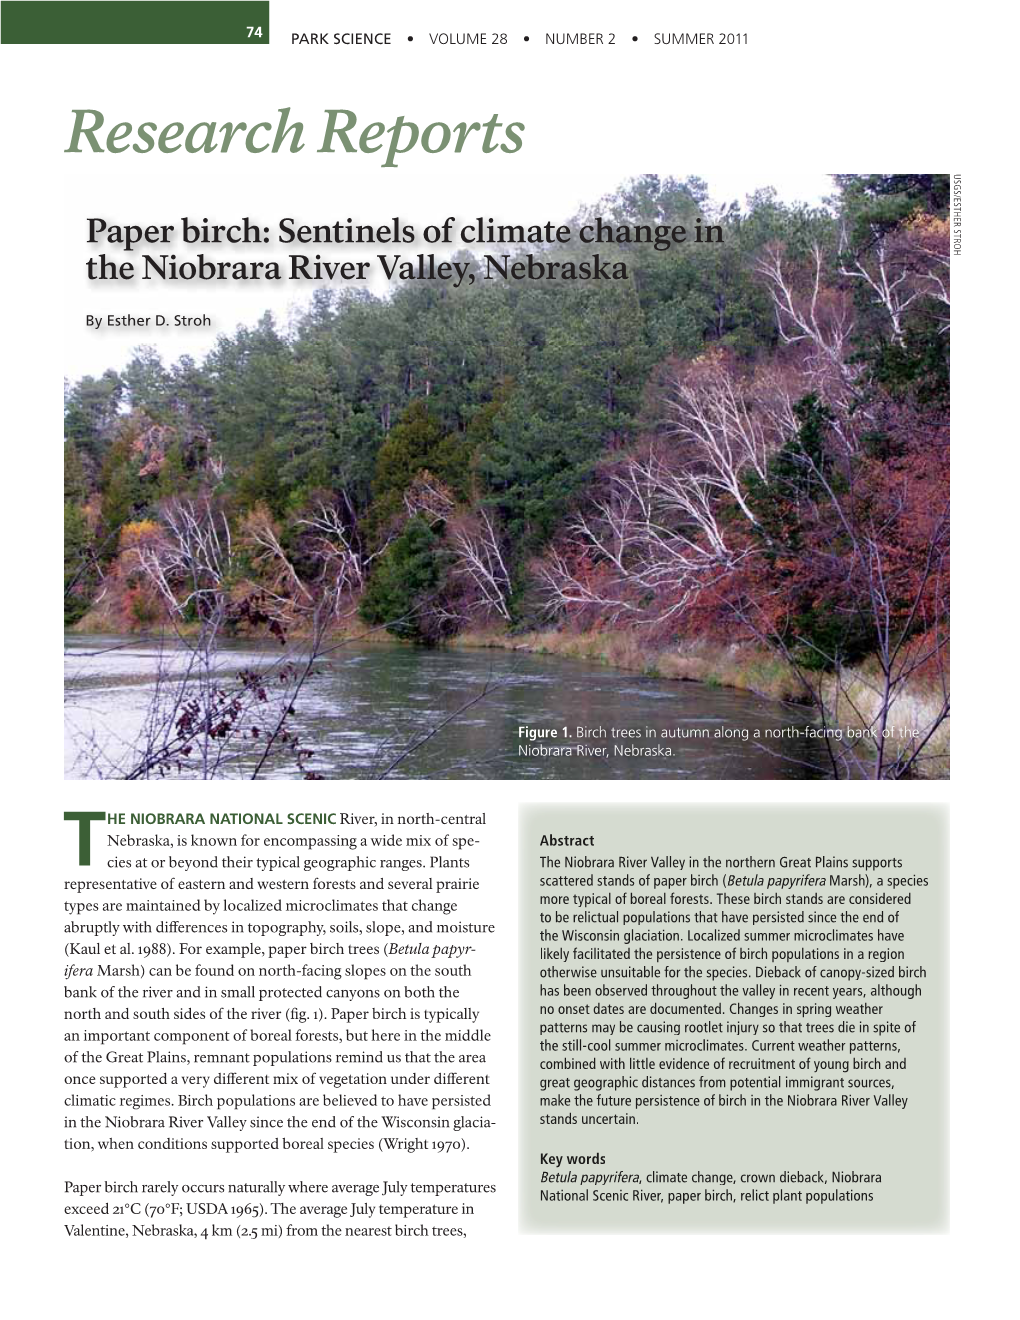 Research Report: Paper Birch: Sentinels of Climate Change in The